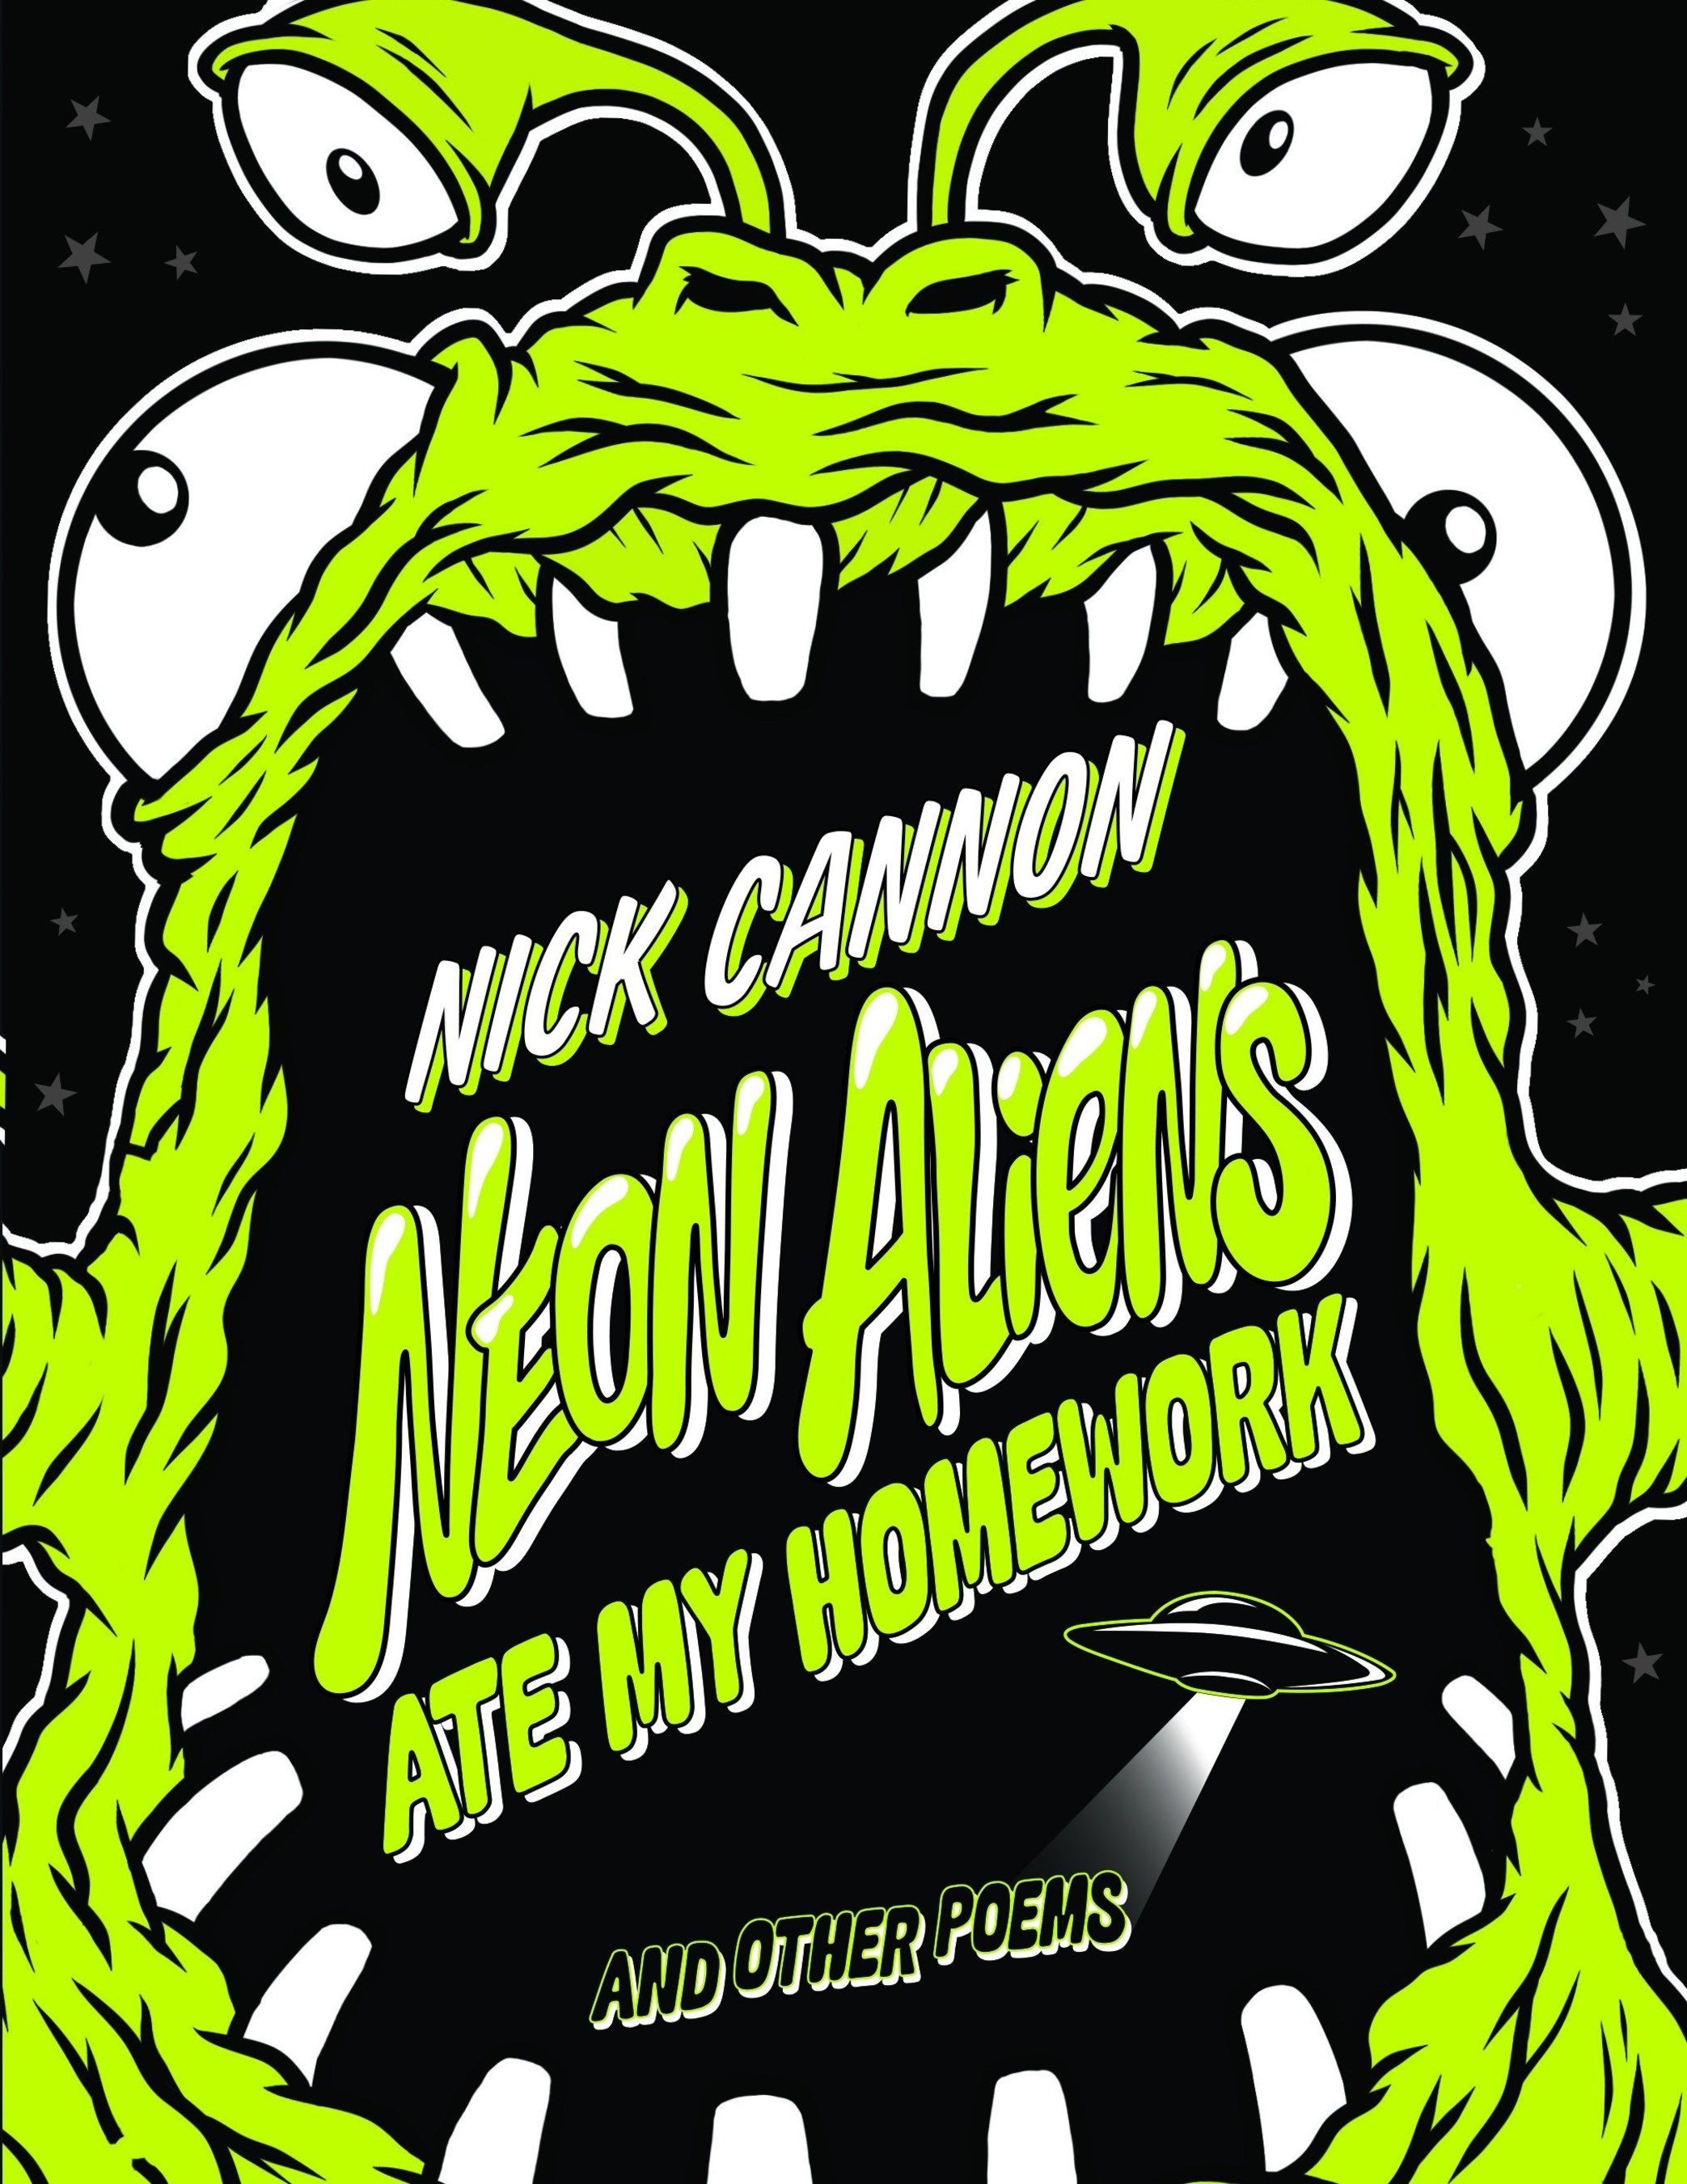 Scholastic to Publish Illustrated Poetry Book for Kids by Nick Cannon. "Neon Aliens Ate My Homework and Other Poems" will be Released in March 2015. (PRNewsFoto/Scholastic)